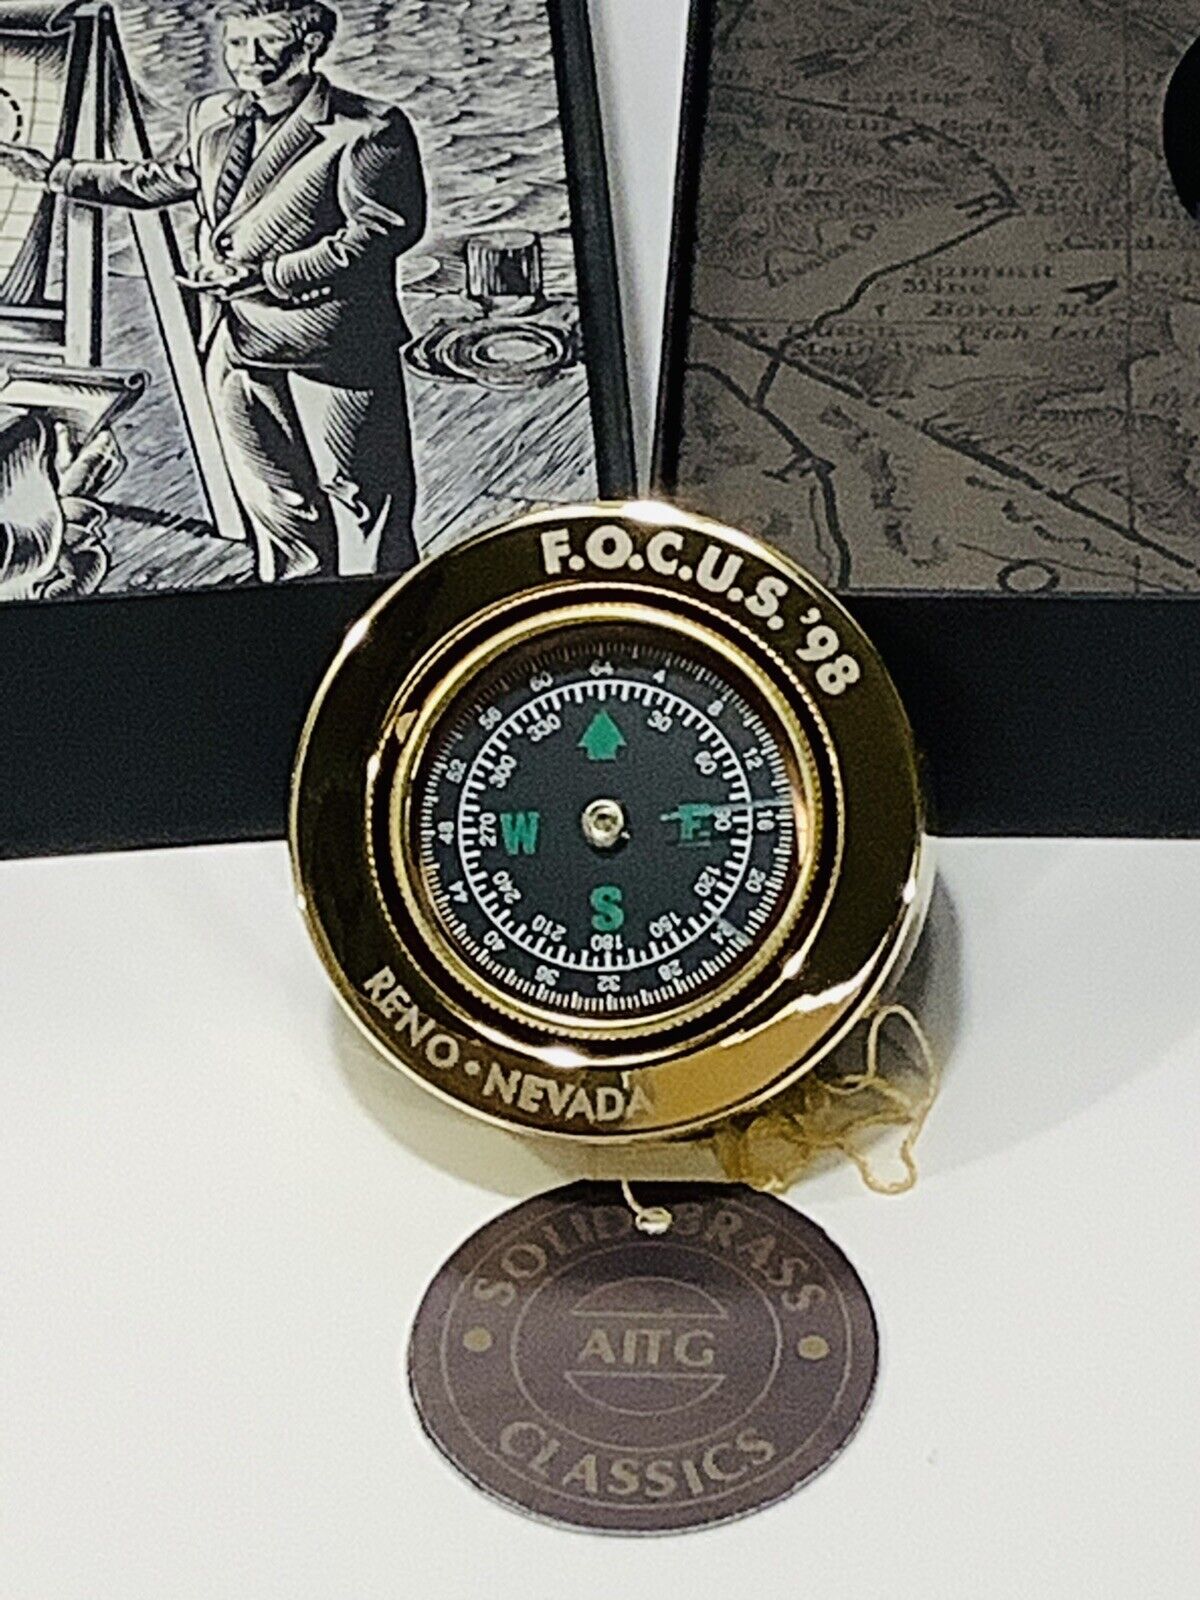 NOS AITG Classics Solid Brass COMPASS Paperweight With Box. Focus 98”Reno